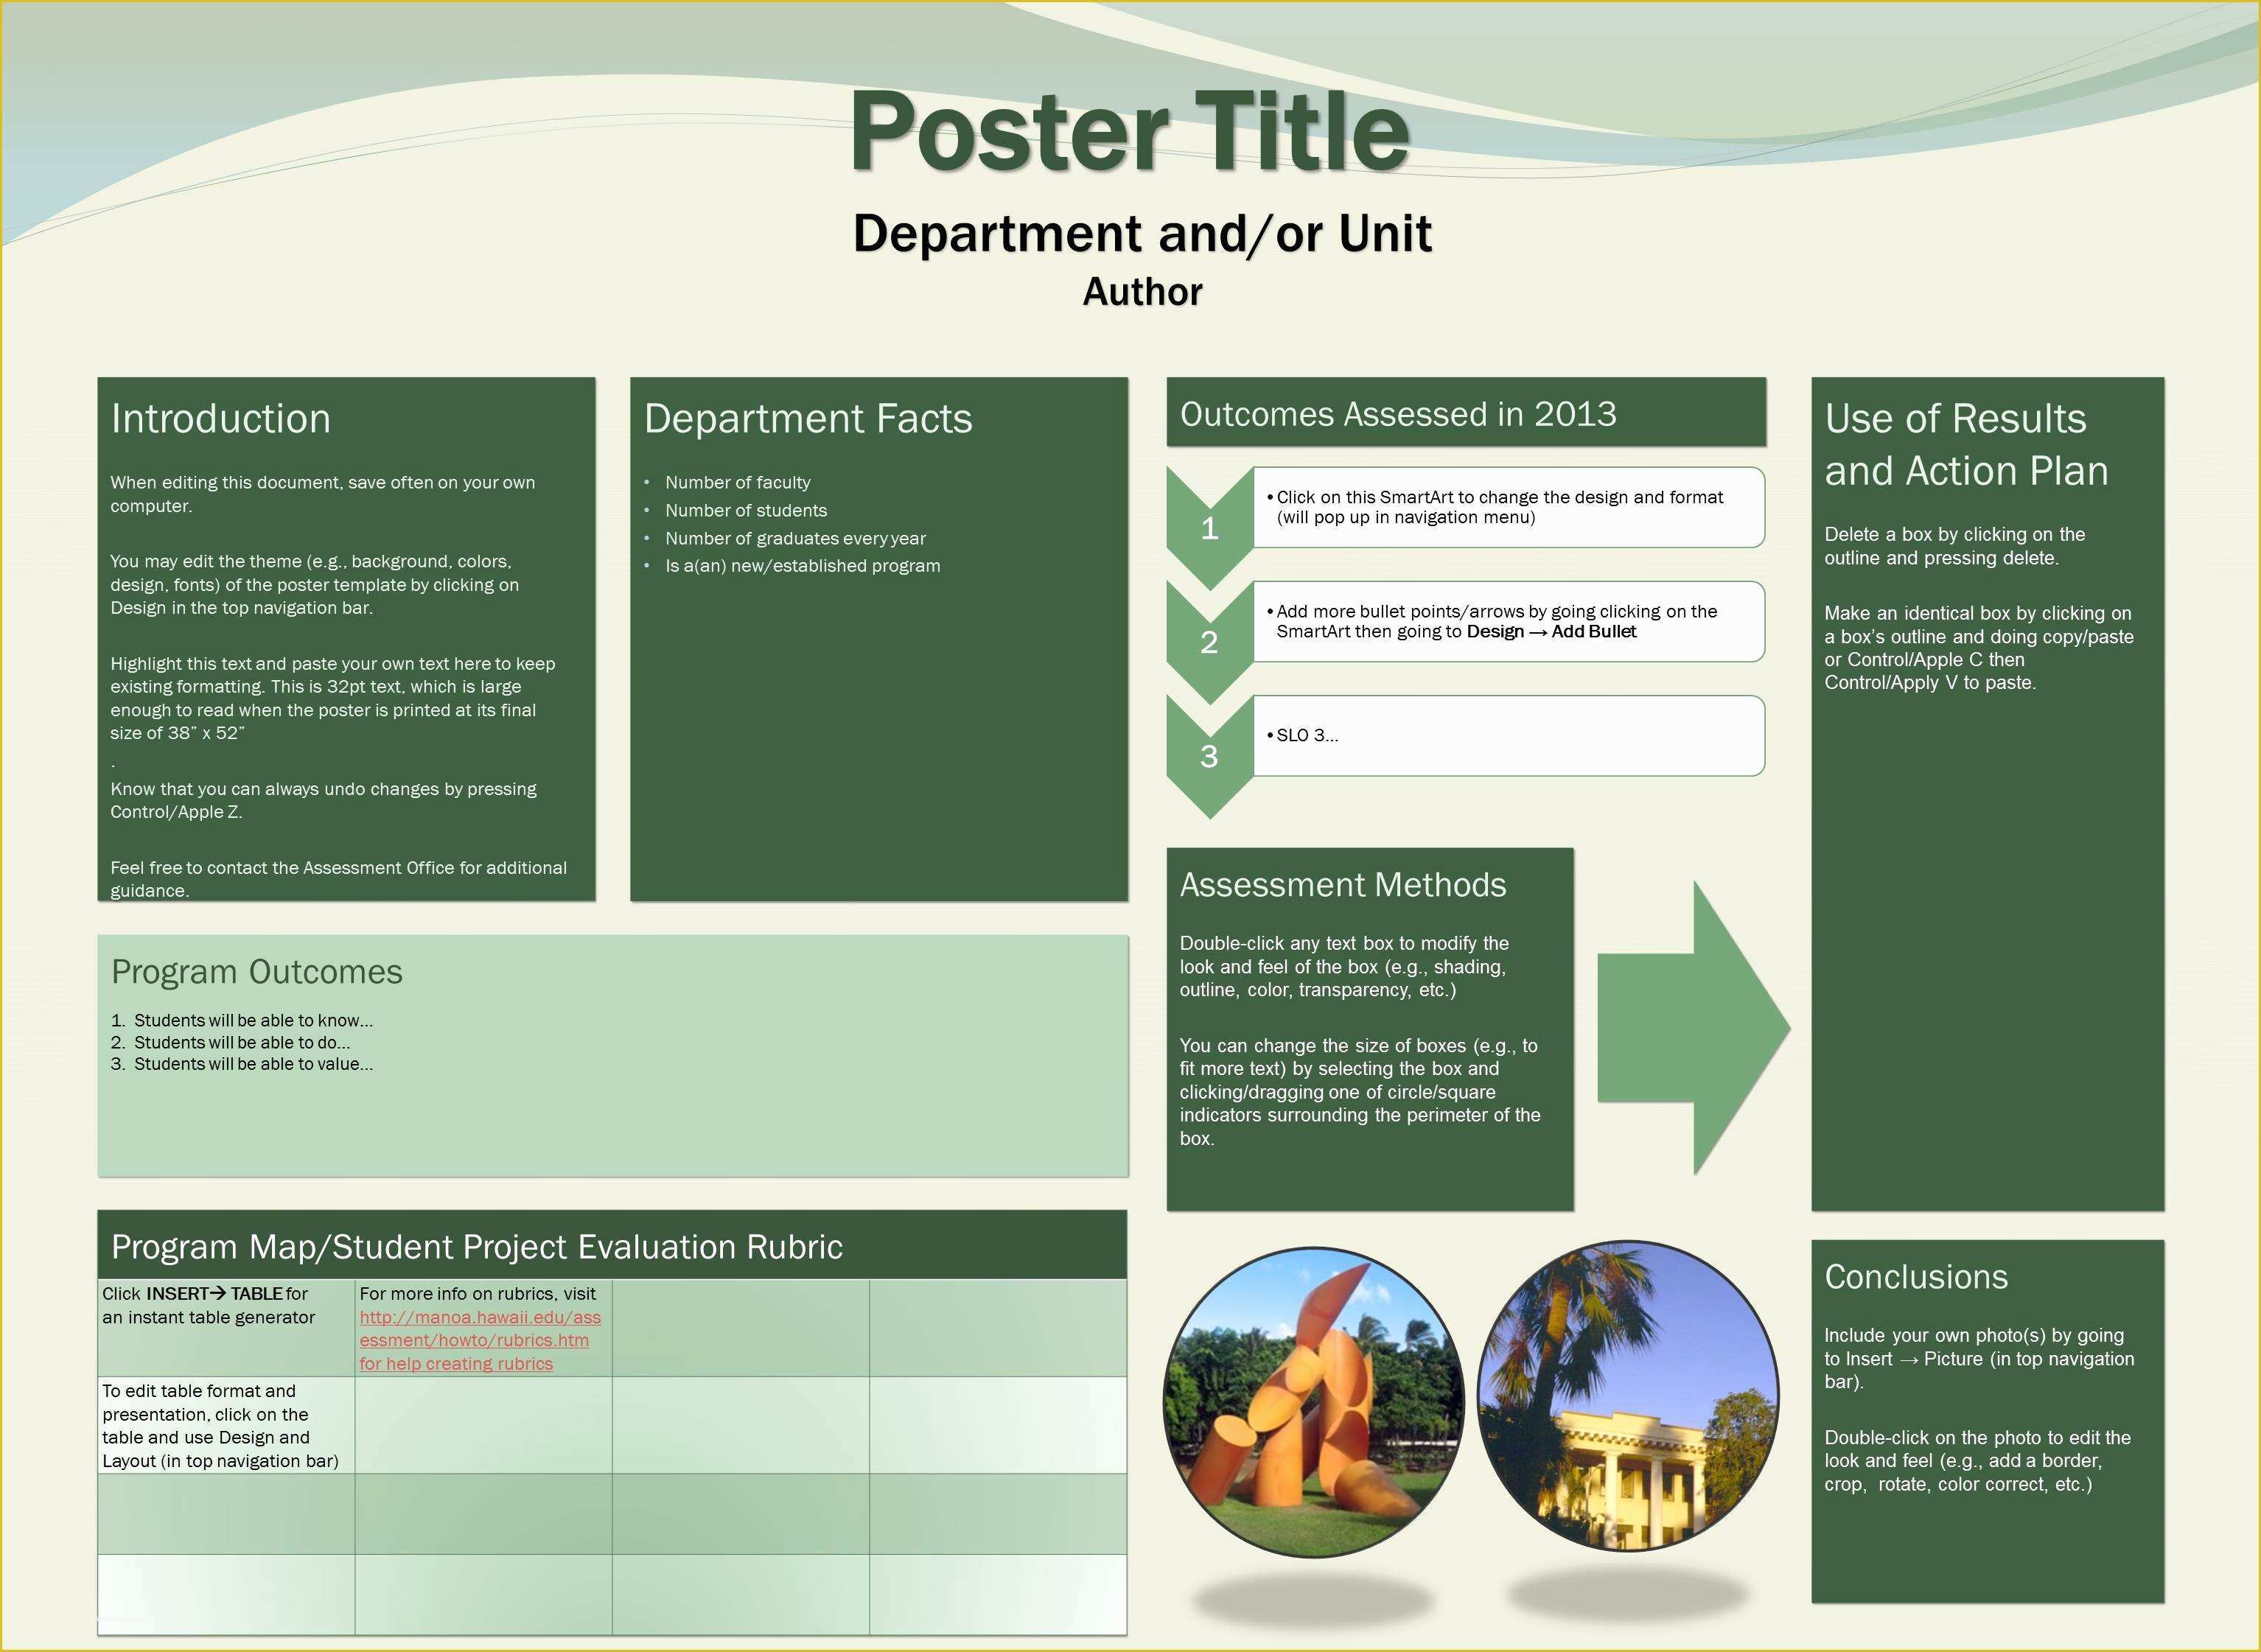 Free Poster Templates Of University Of Hawaii at Manoa assessment Fice